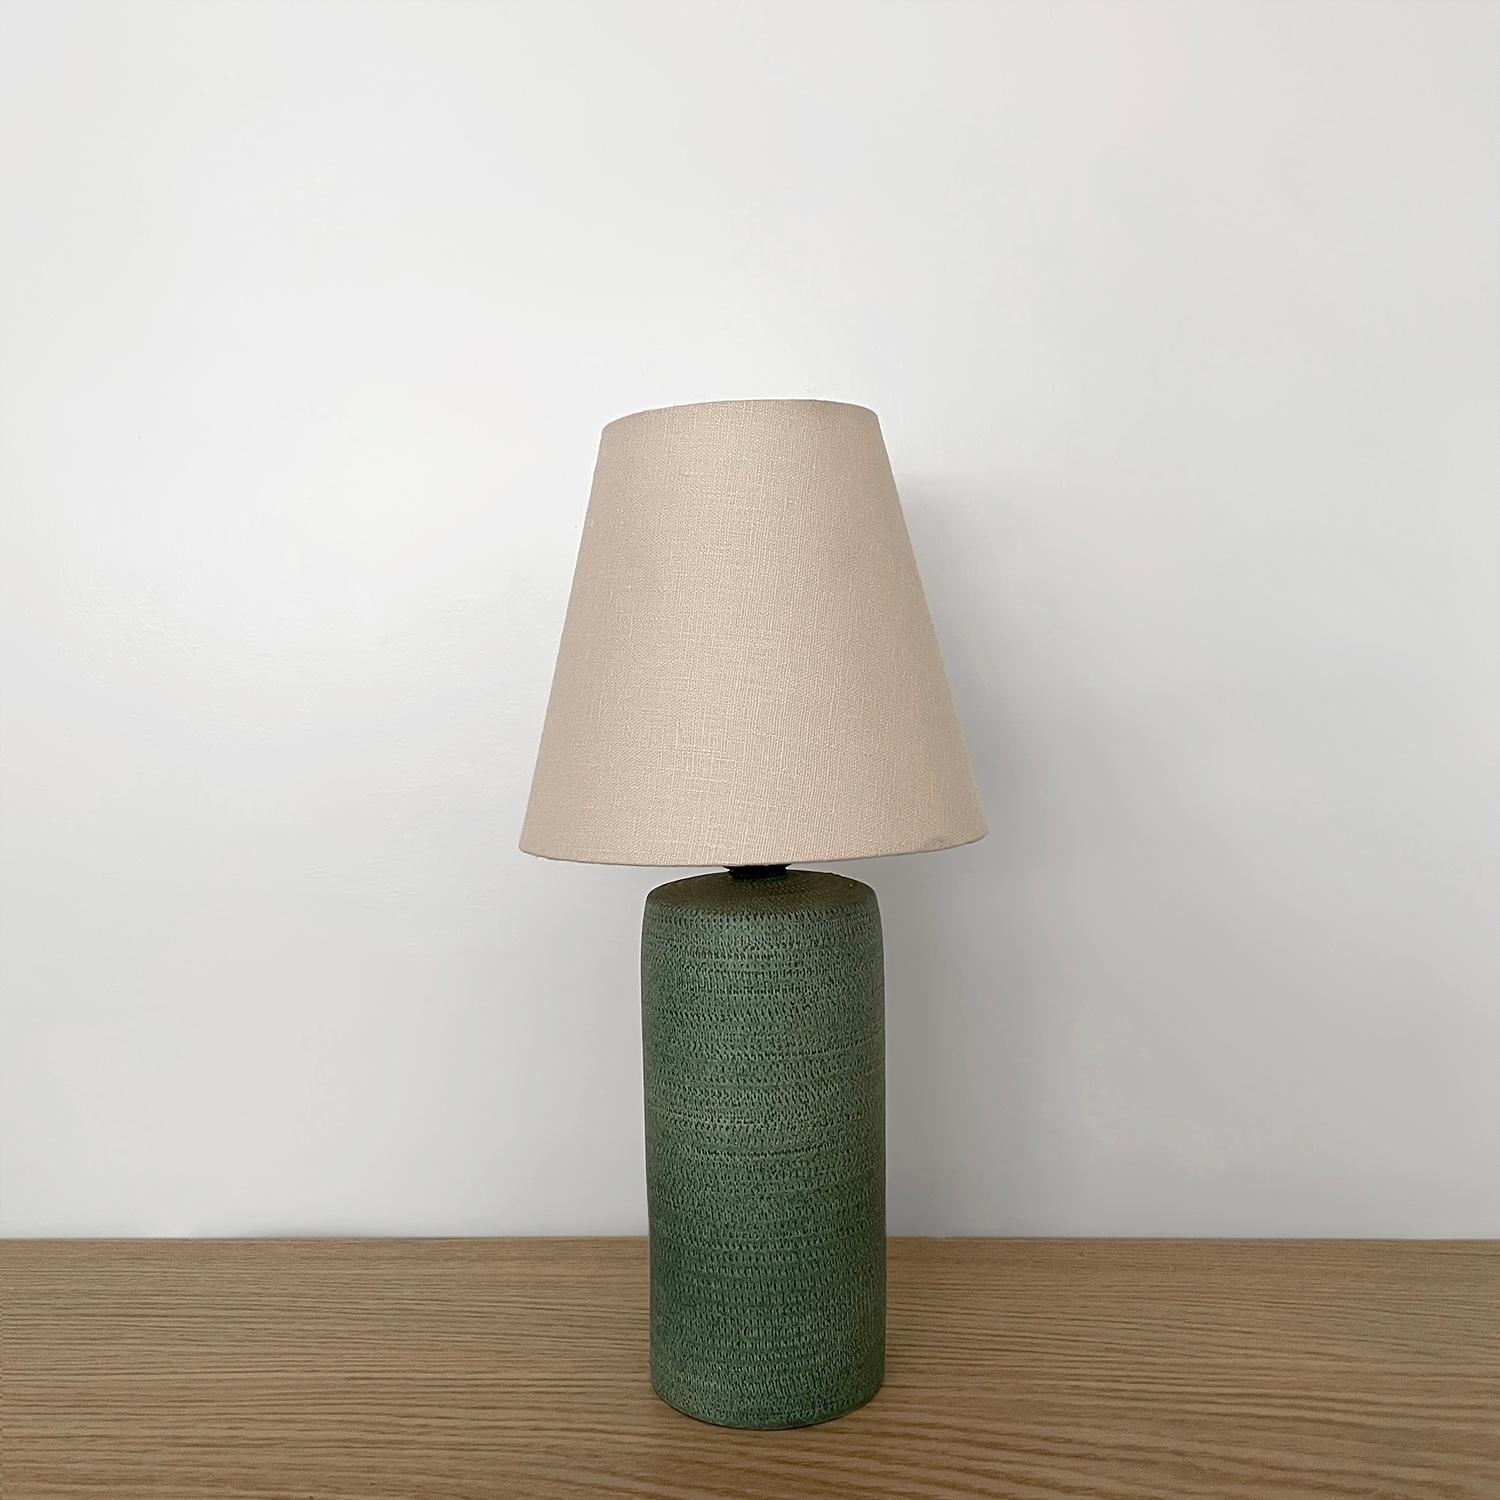 Manufactured by Bitossi
Organic composition and feel
Rich vibrant green ceramic lamp base is adorned with wonderful etched texturing throughout
New linen shade
Newly rewired
Single socket medium base with aged brass tulip shaped housing
Patina from